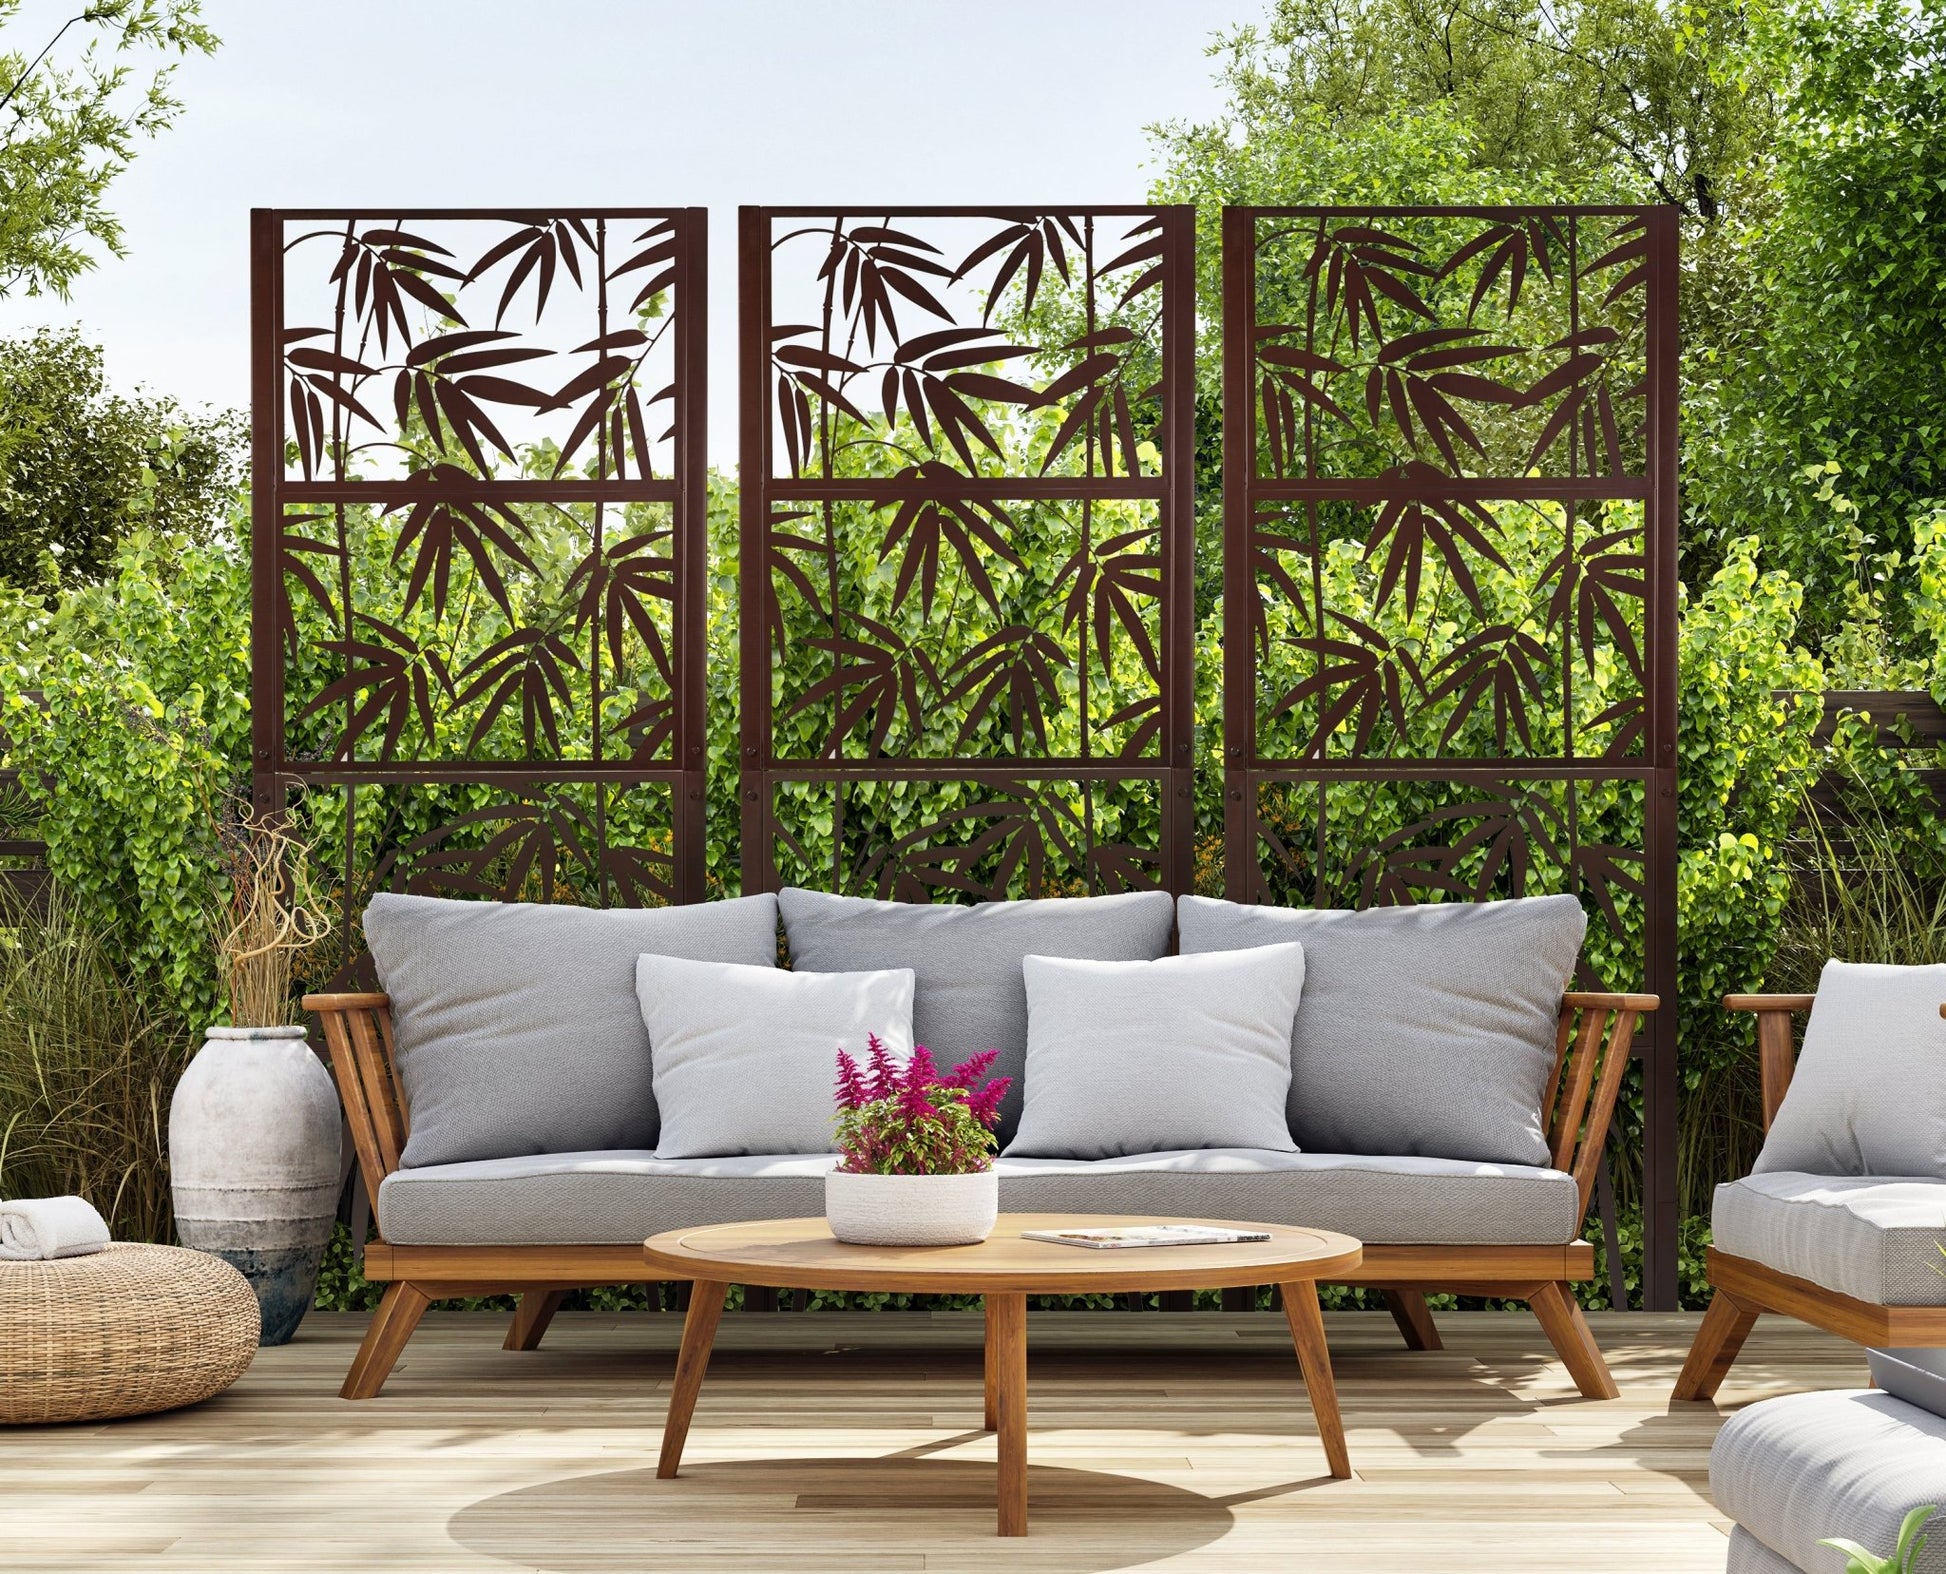 H Potter Rose Trellis Screen Privacy for Patio Deck Balcony 